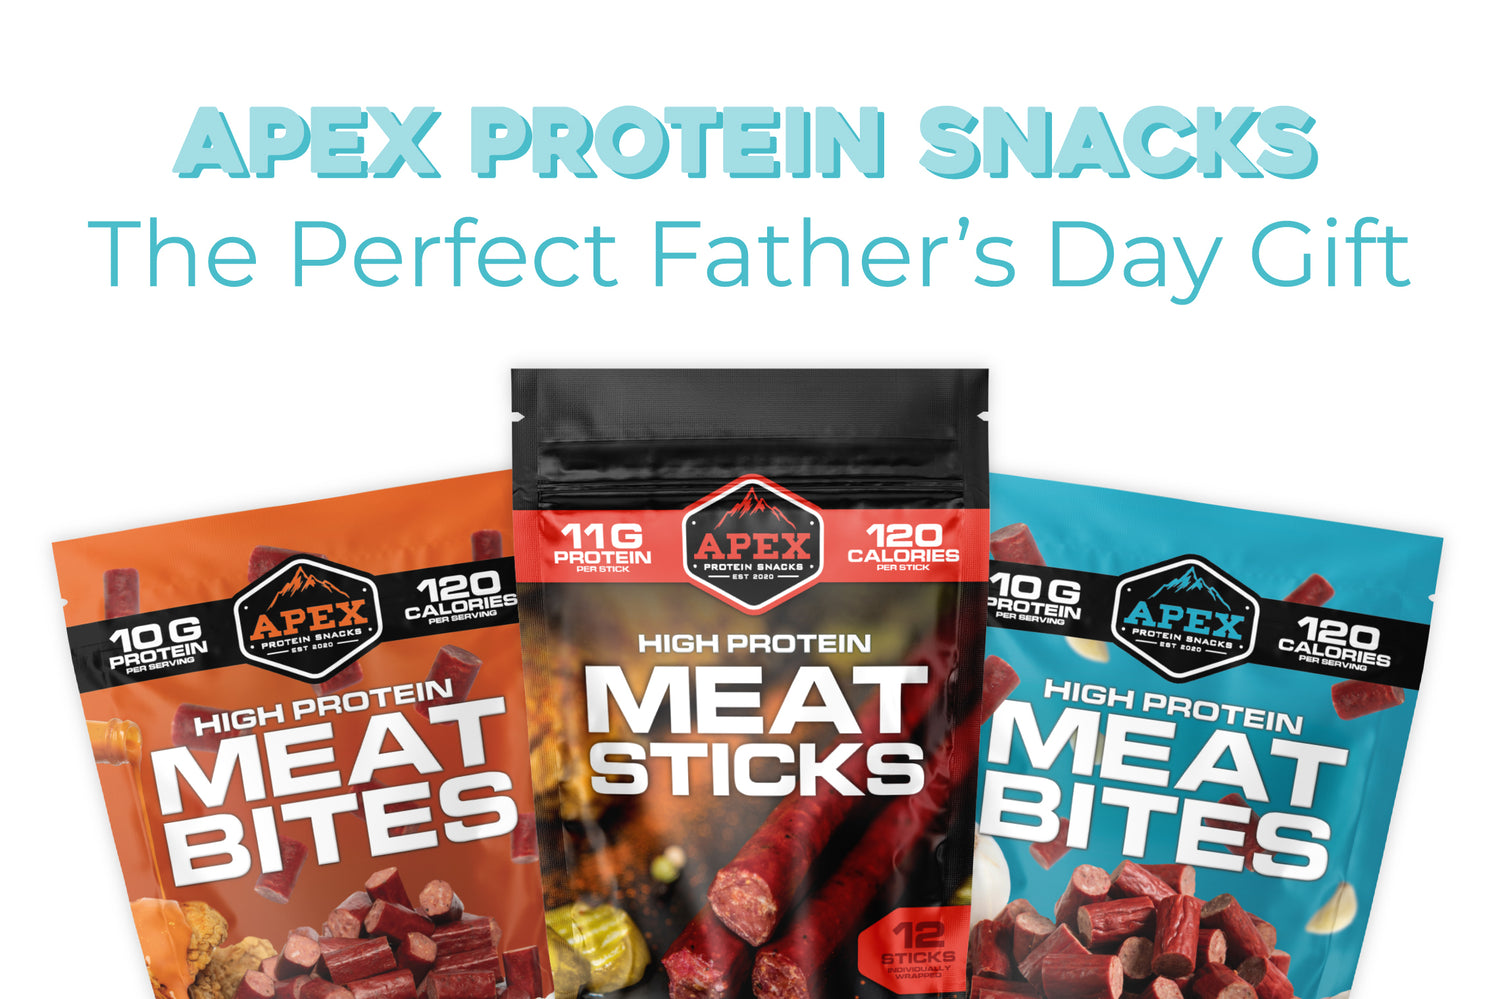 Apex Protein Snacks - The Perfect Father’s Day Gift